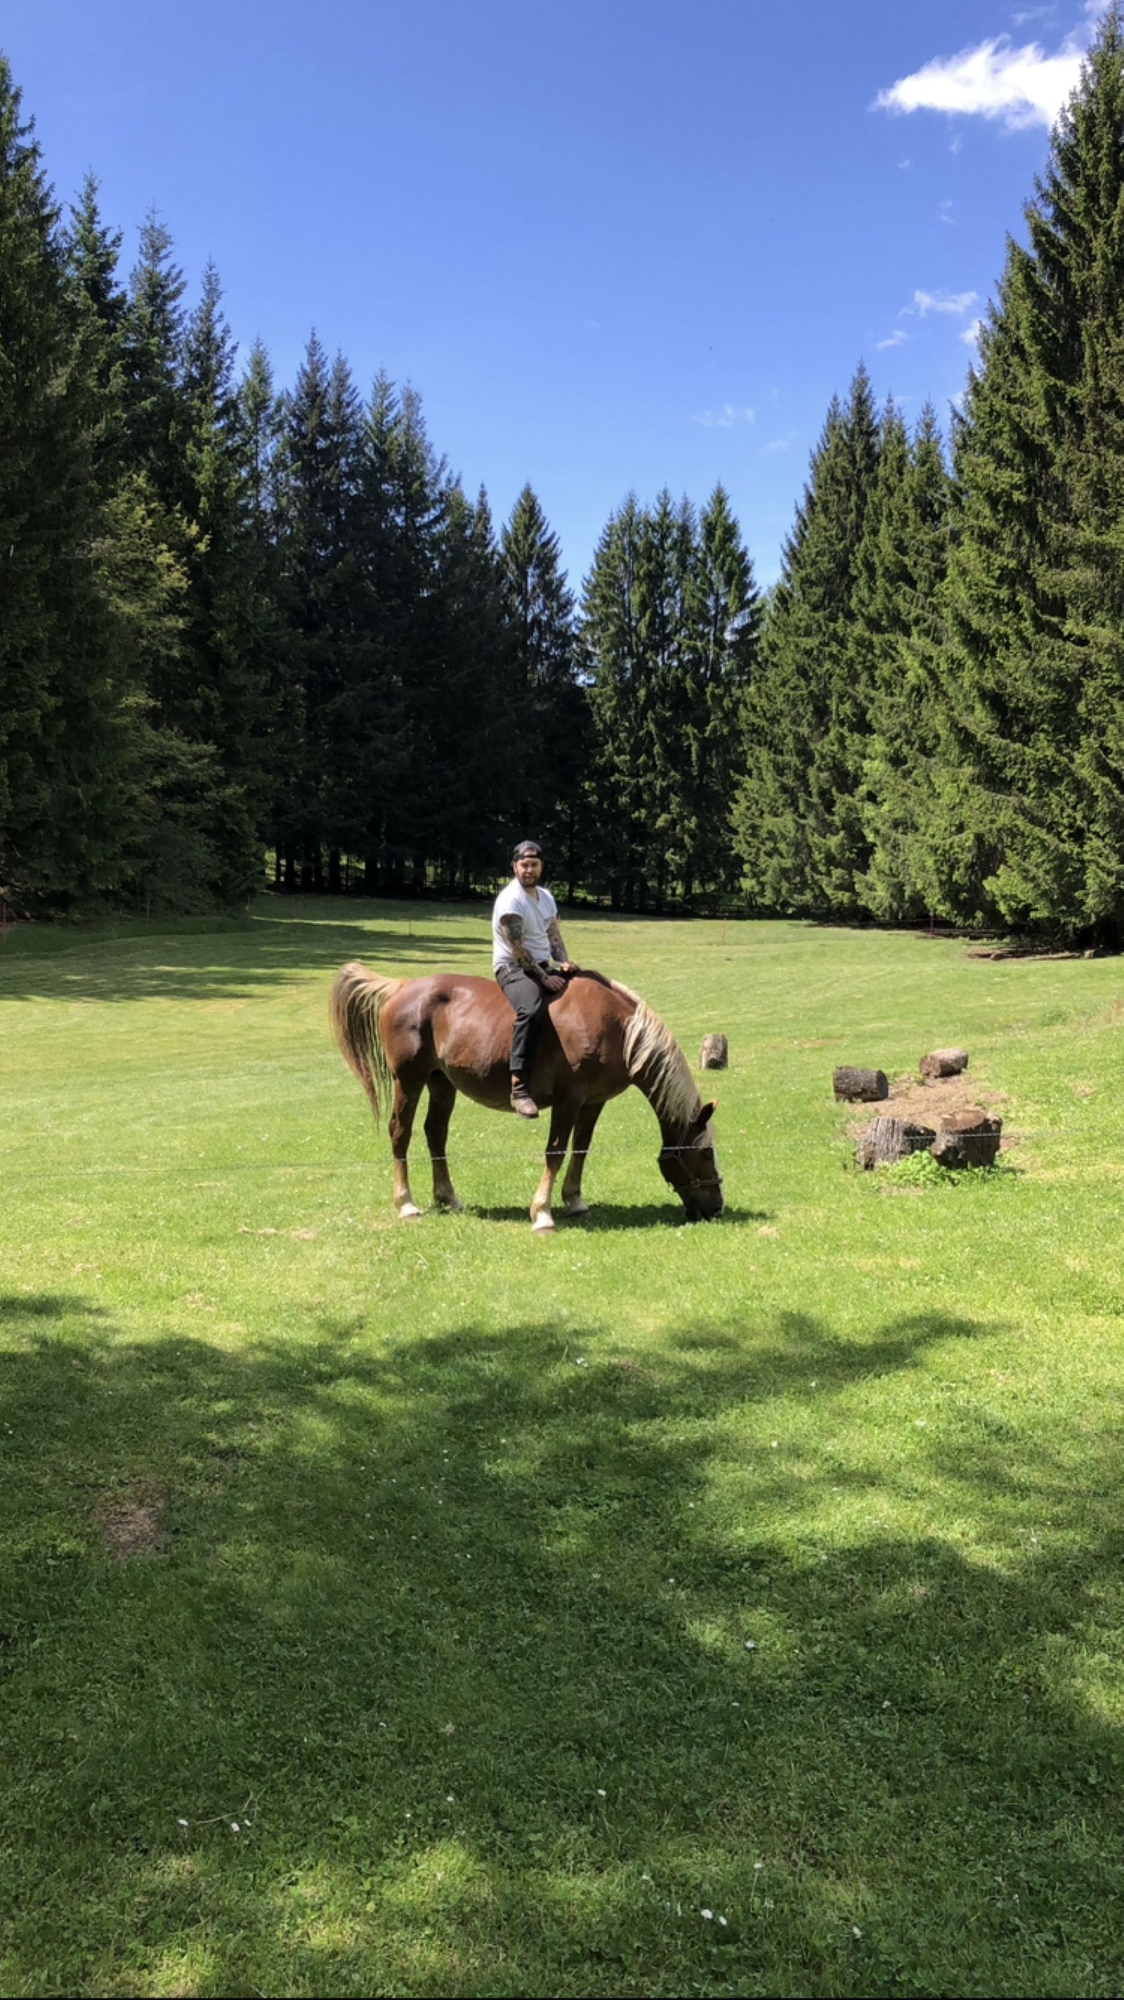 Horse riding in the nature of Villa Basilica with tasting of seasonal products